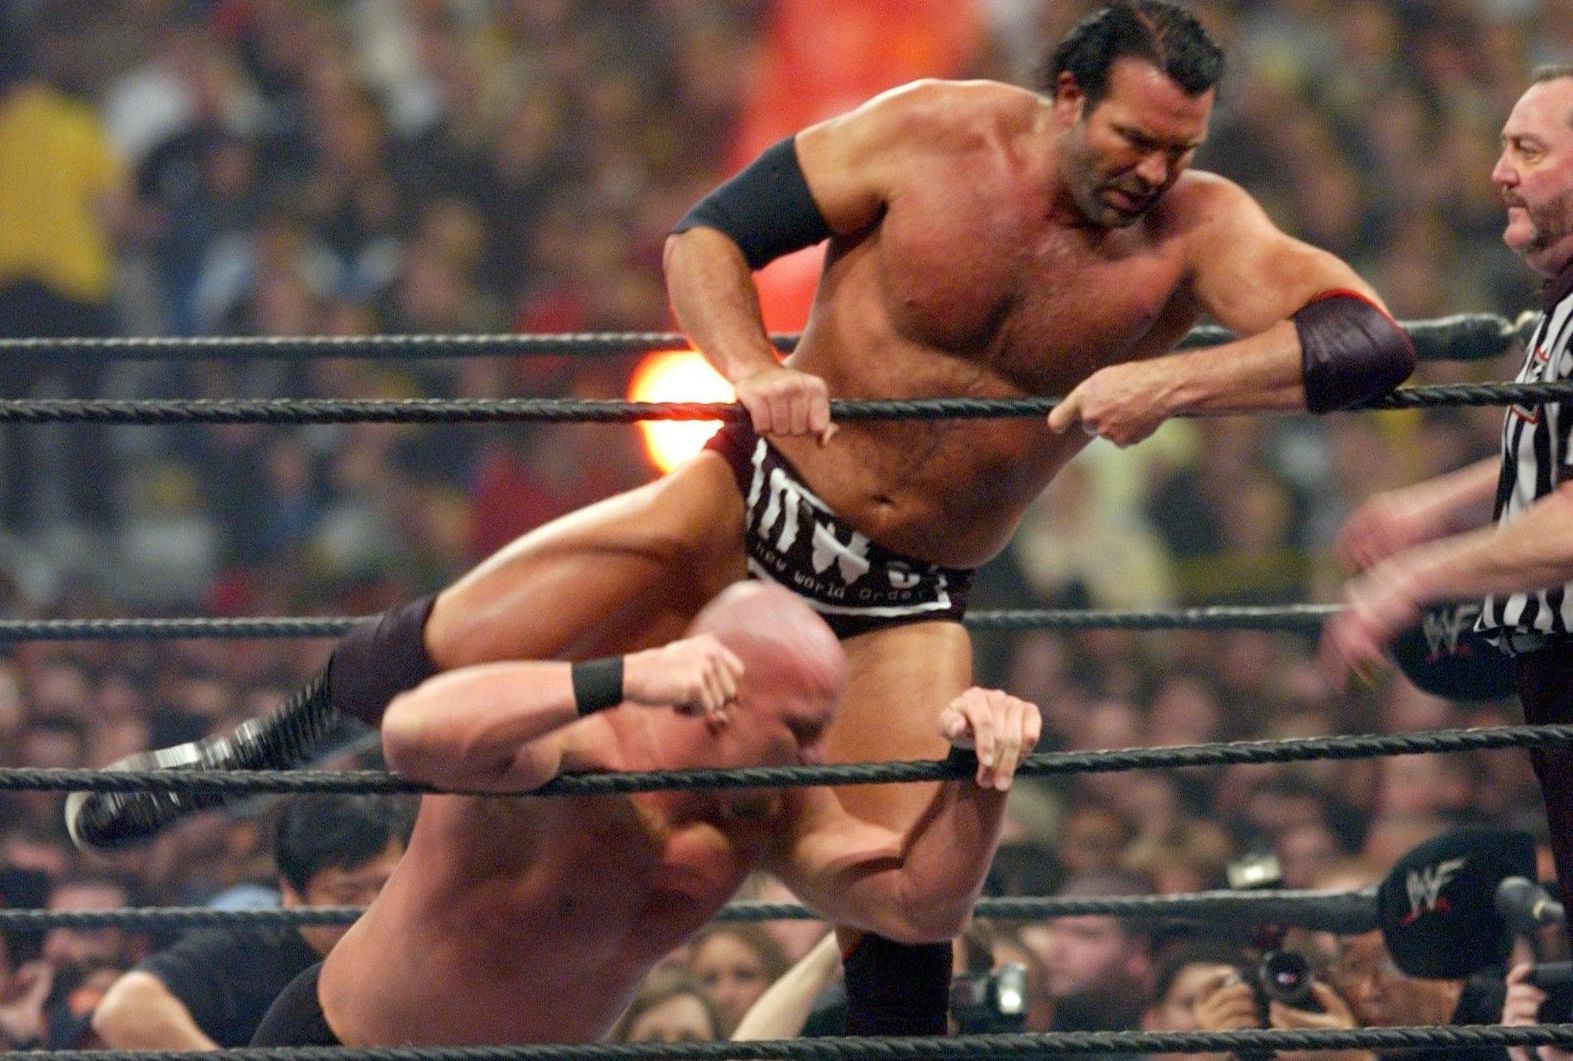 Scott Hall had a disappointing feud and match with Steve Austin at WM X8